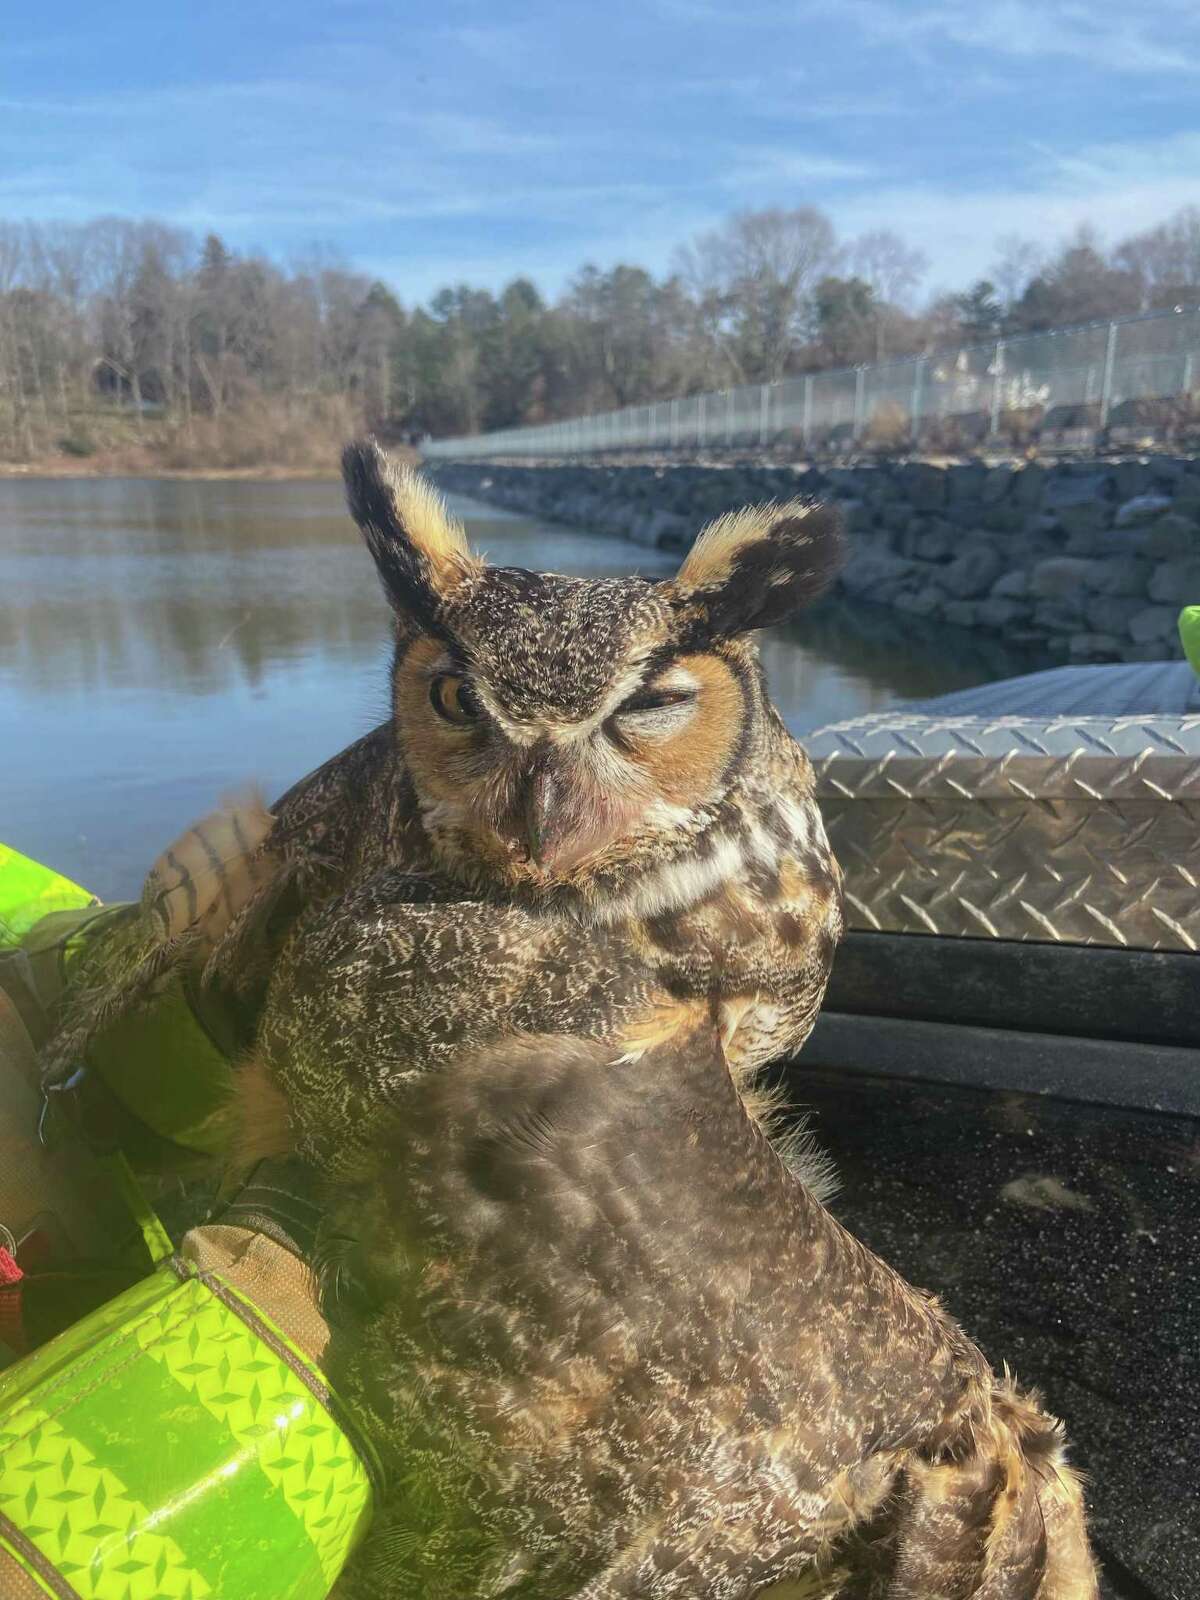 Firefighters with the Round Hill and Glenville volunteer fire companies helped rescue a great horned owl suspended on a fishing wire in the South Stanwich reservoir Monday afternoon.